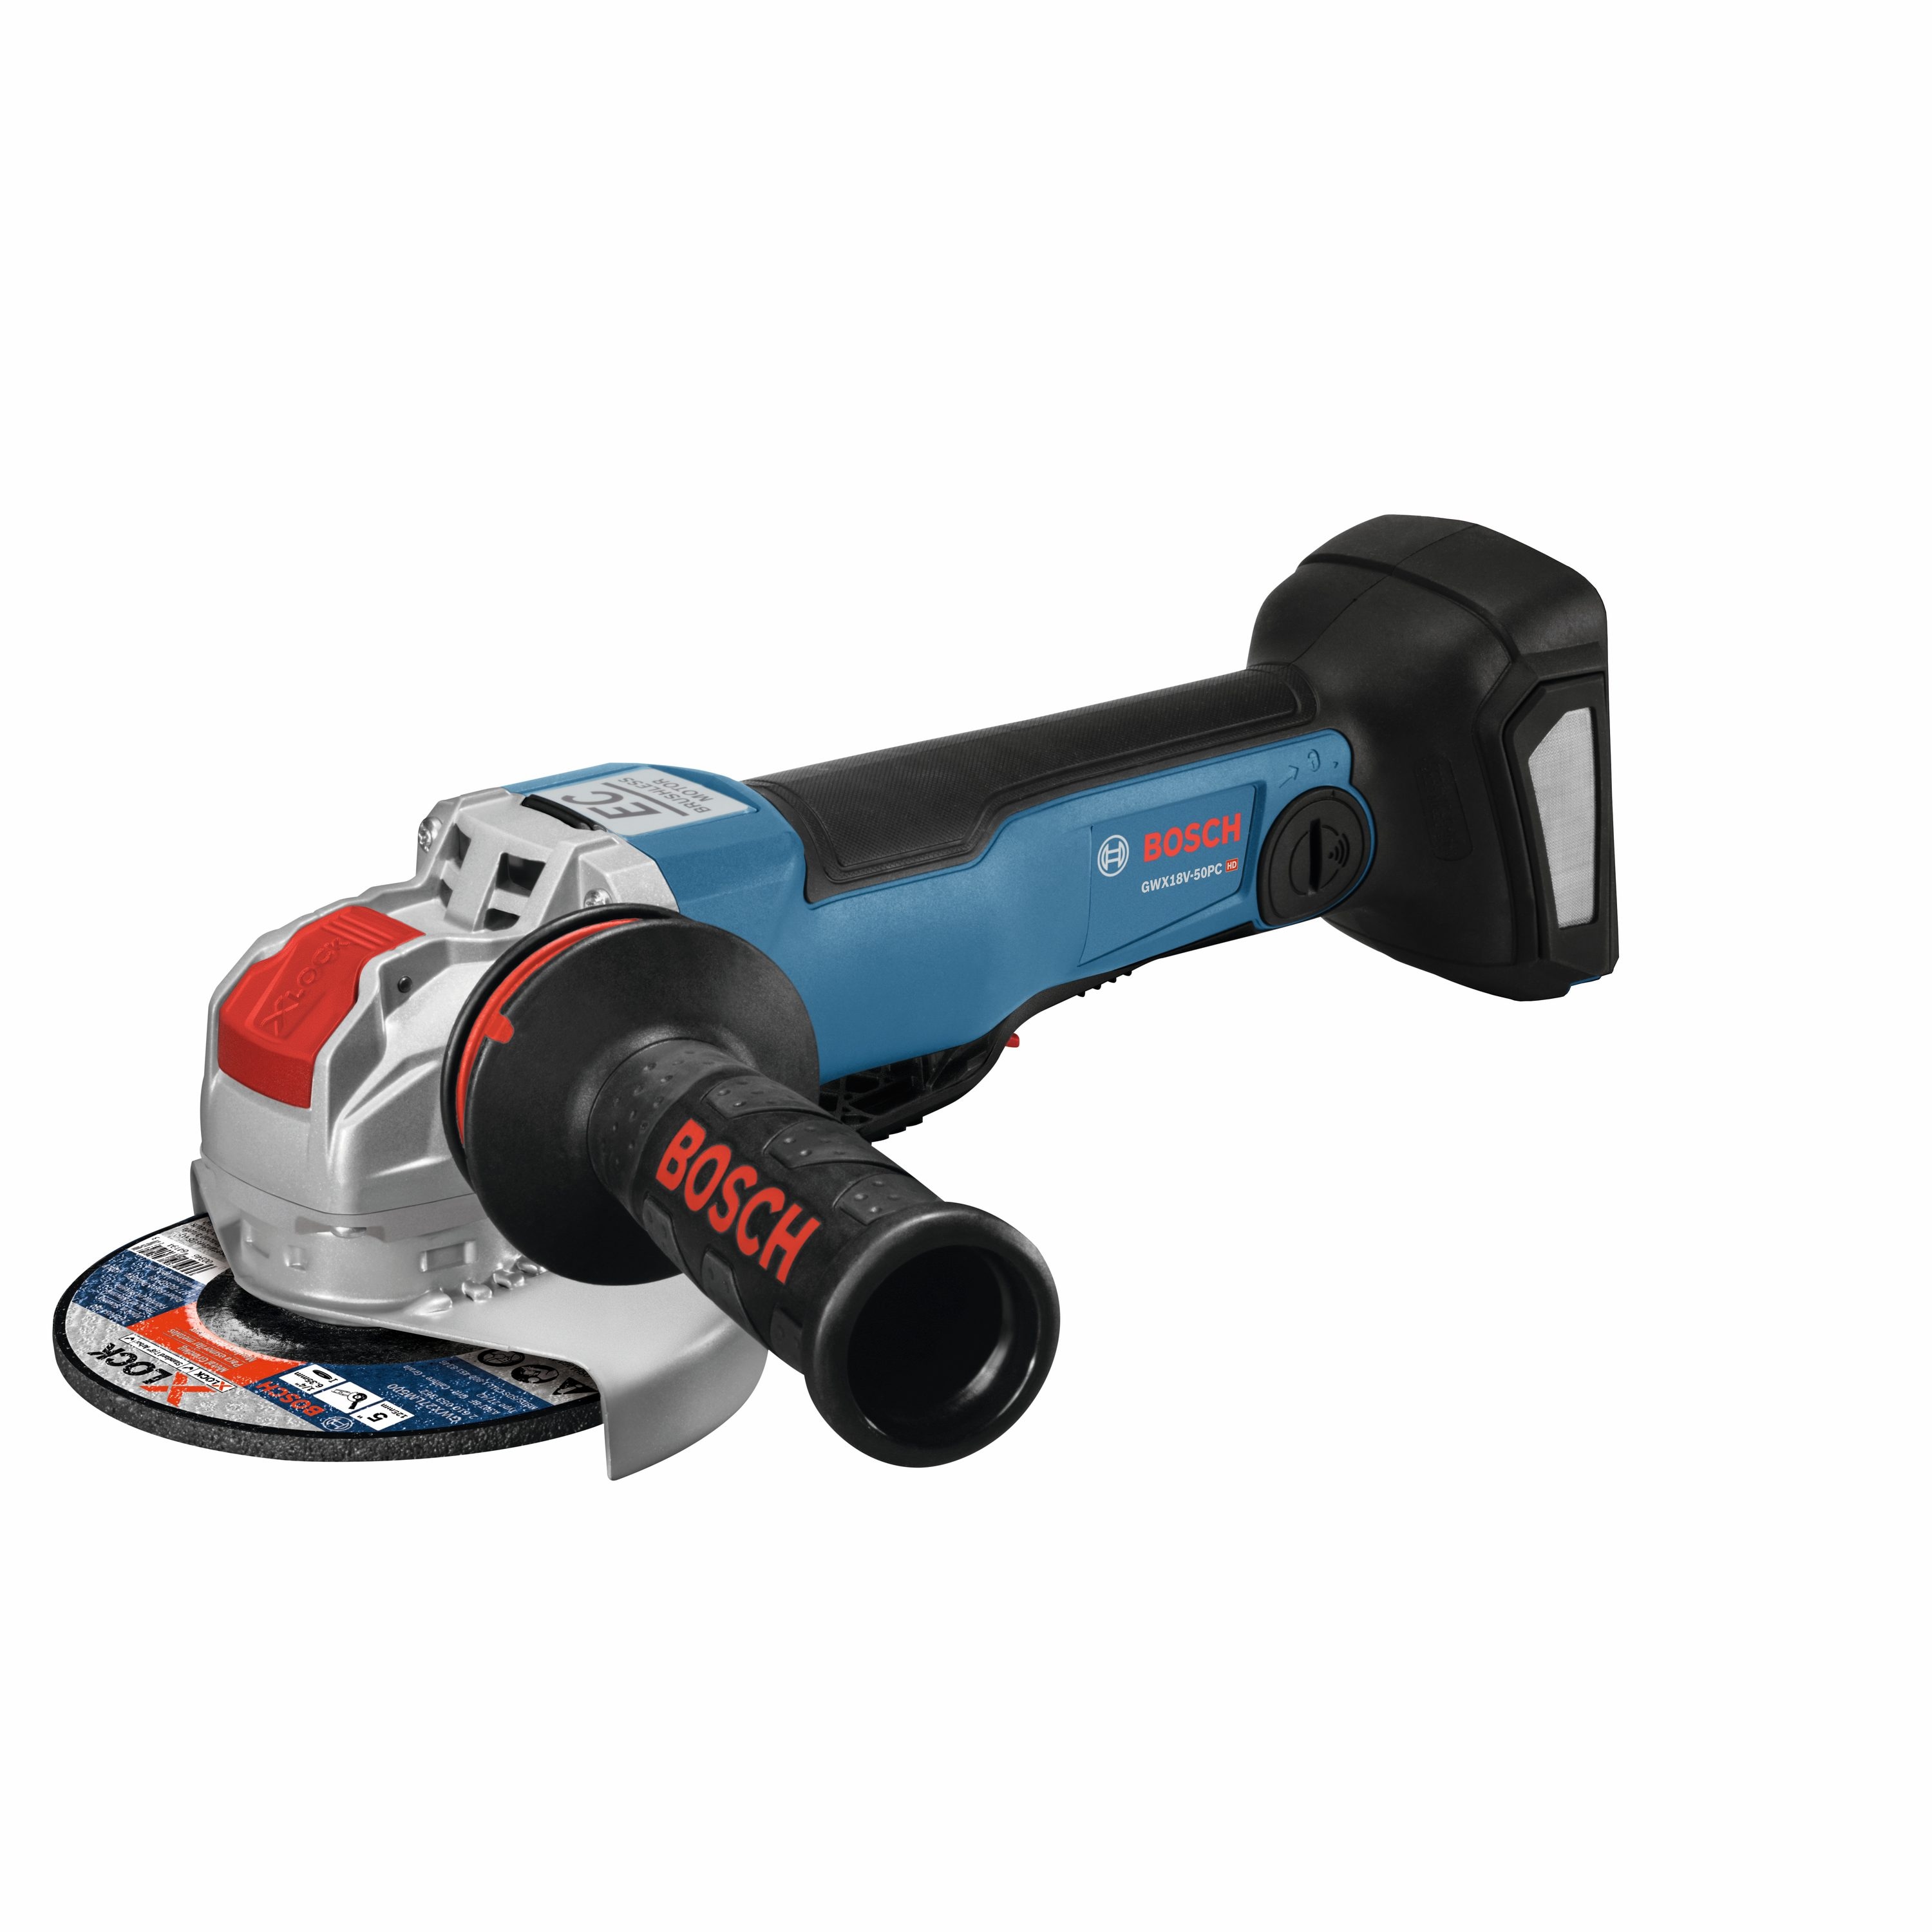 Bosch PROFACTOR 5-in 18-volt Paddle Switch Brushless Cordless Angle Grinder  (Tool Only)